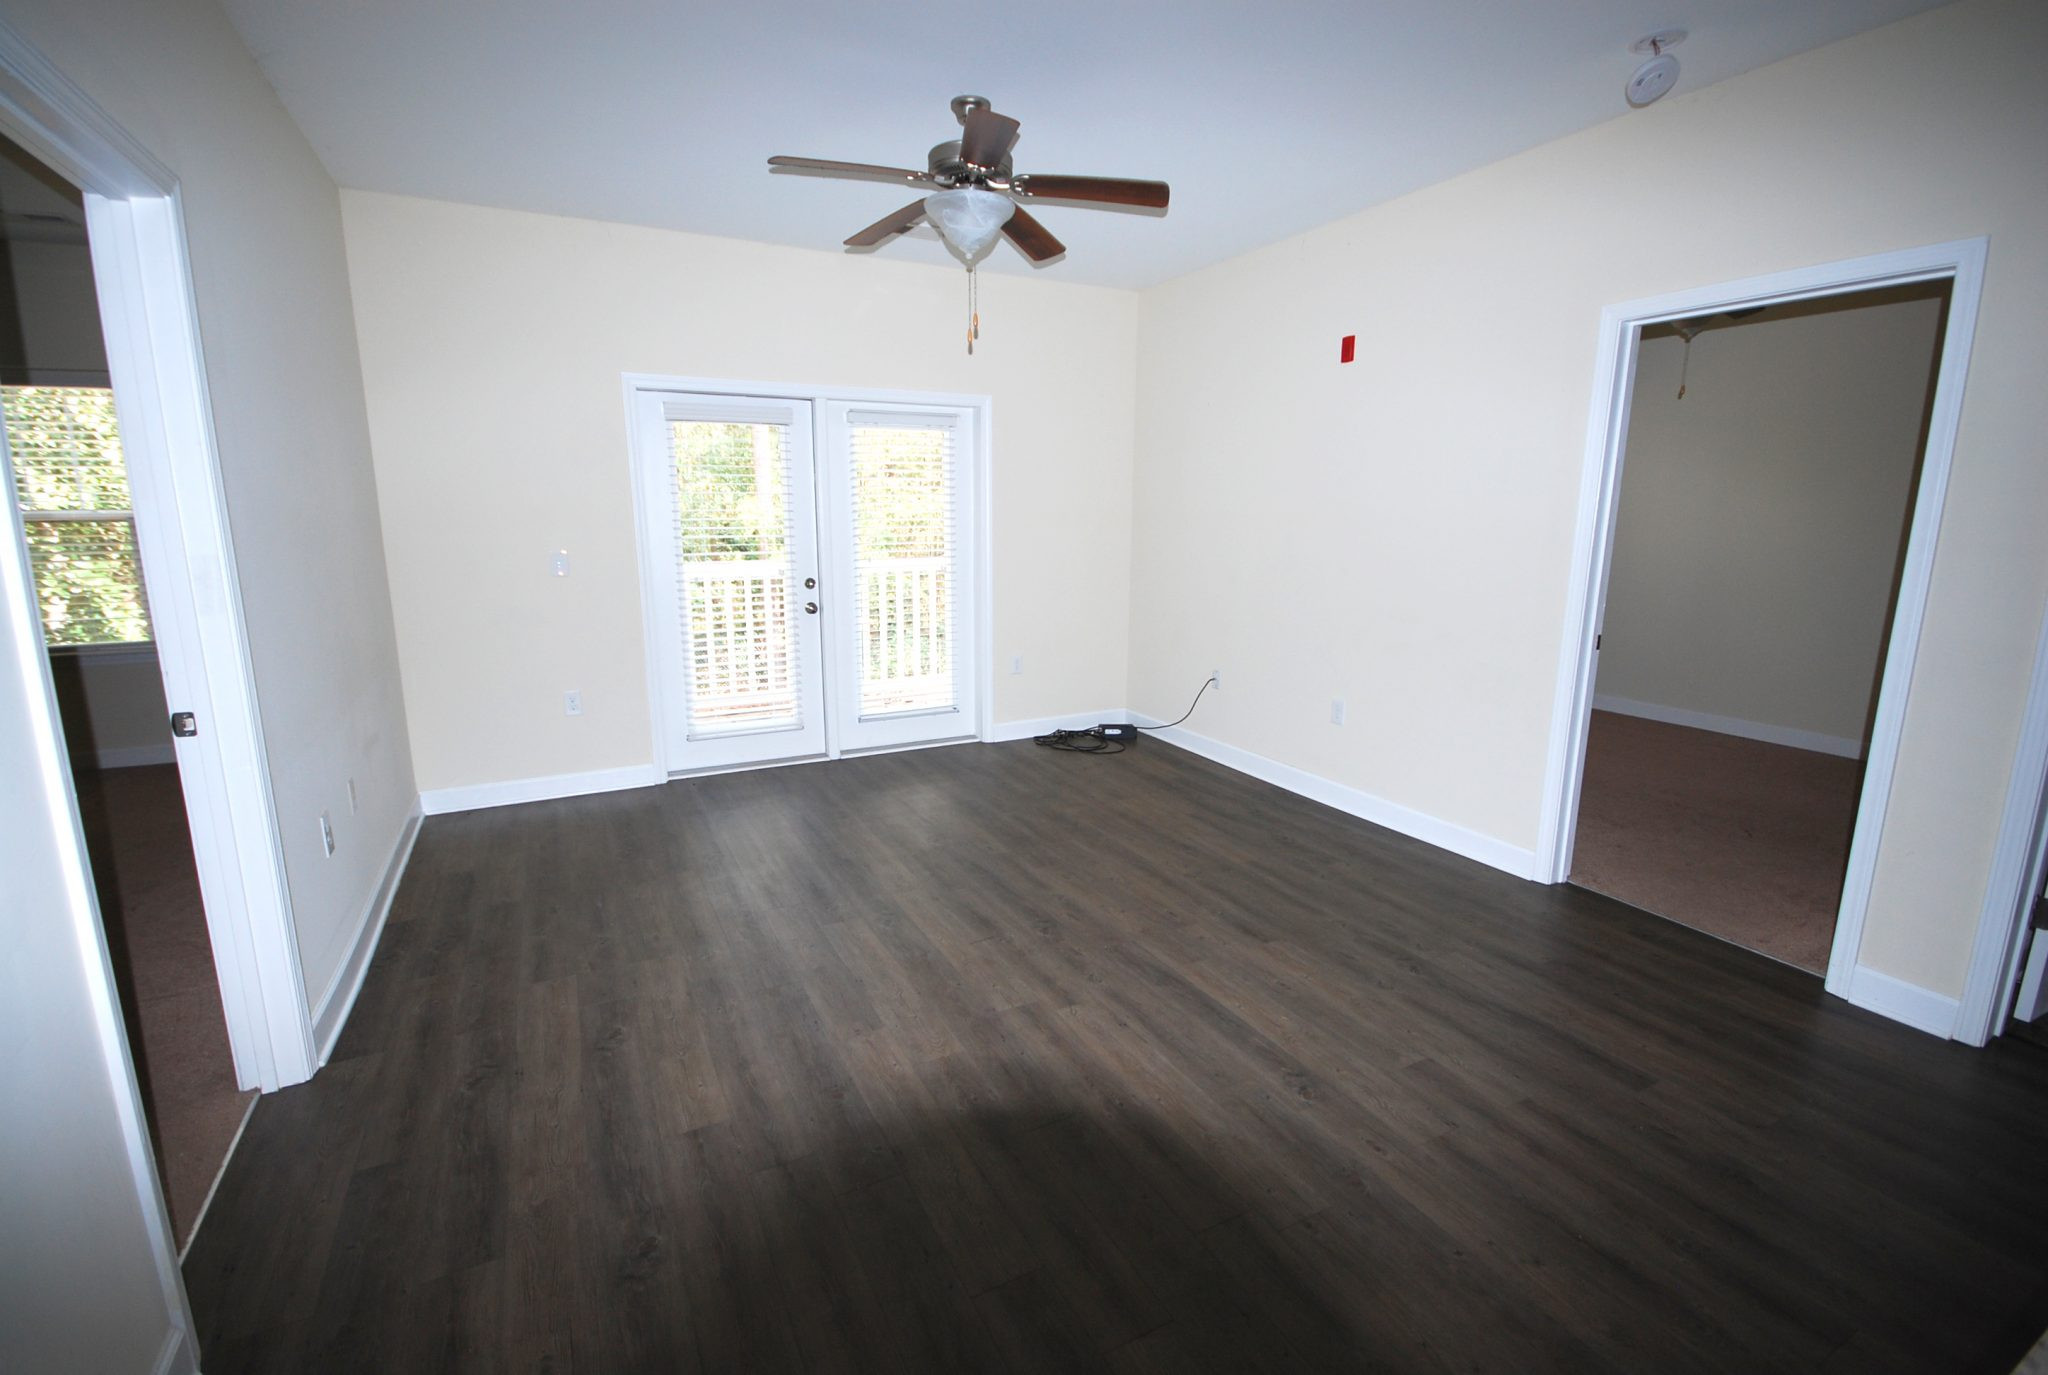 hardwood flooring concord nc of 245 s kerr ave wilmington nc 28403 centrally located newer with oak court apartments of wilmington near randall parkway and walking distance to uncw 245 s